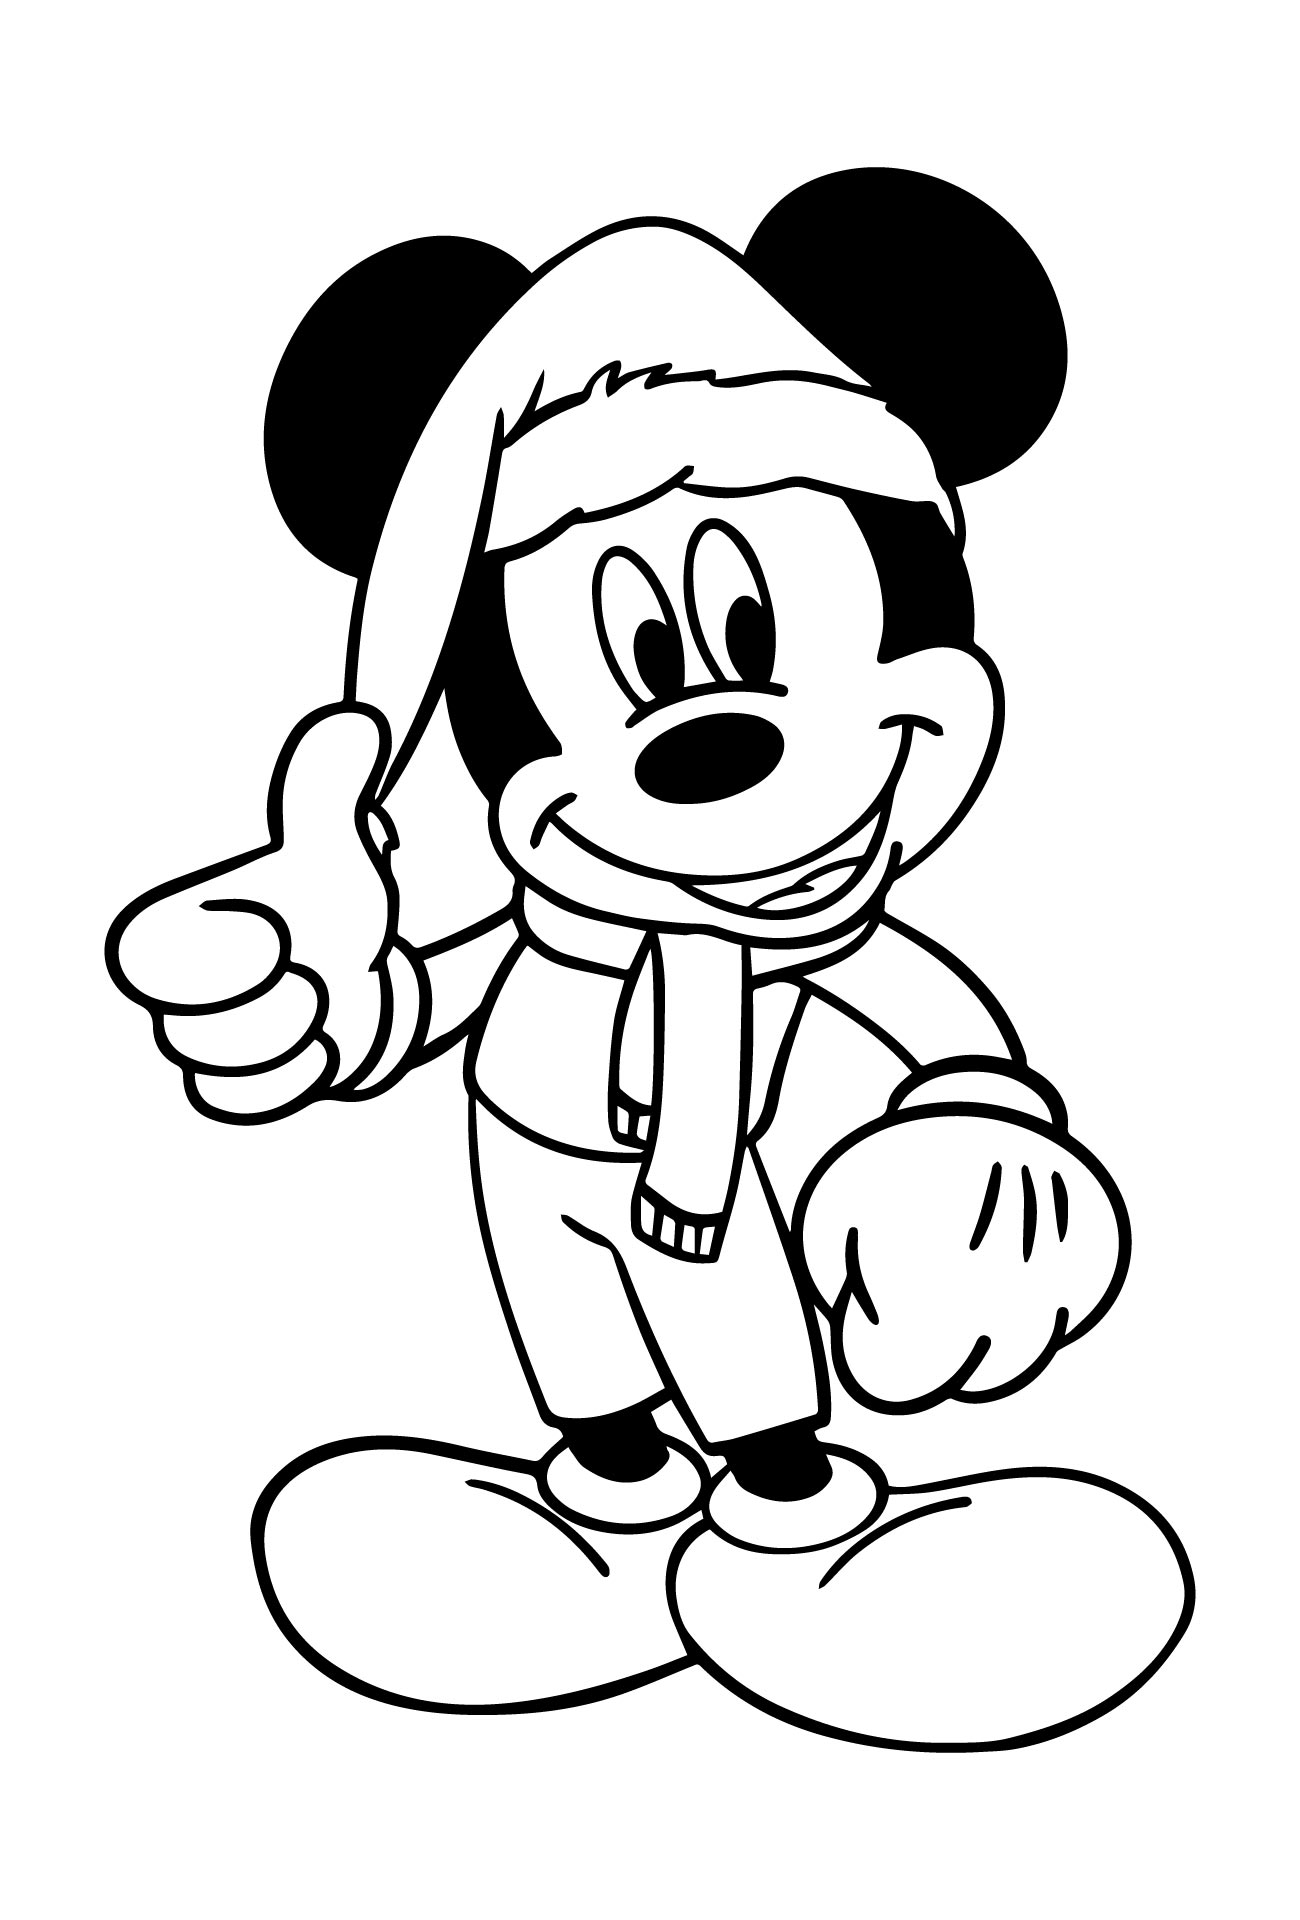 Mickey Christmas Coloring Pages Printable